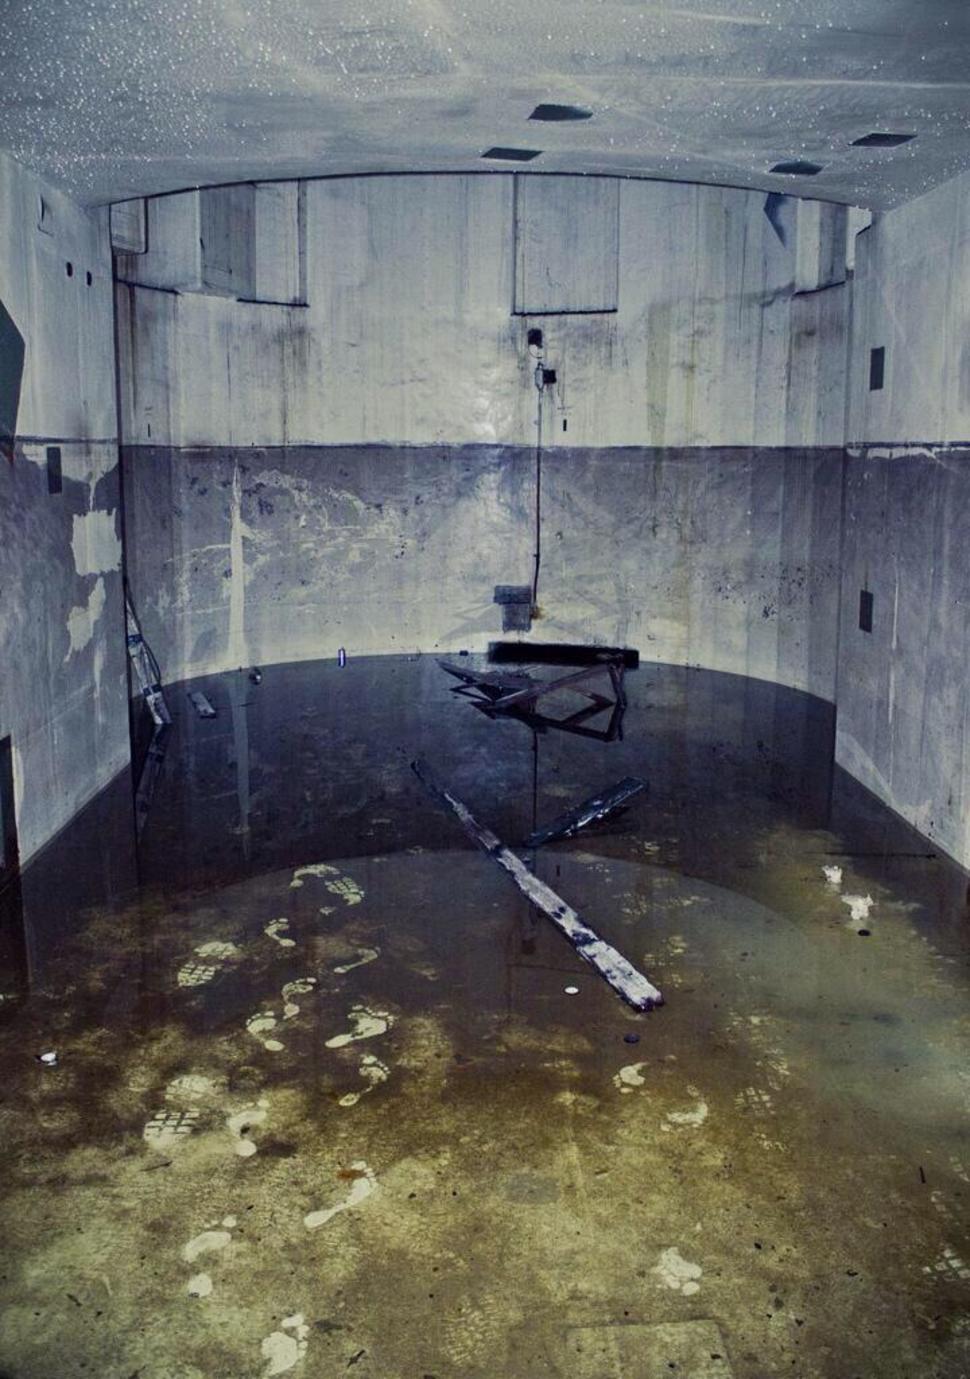 Bare footprints in an abandoned nuclear reactor